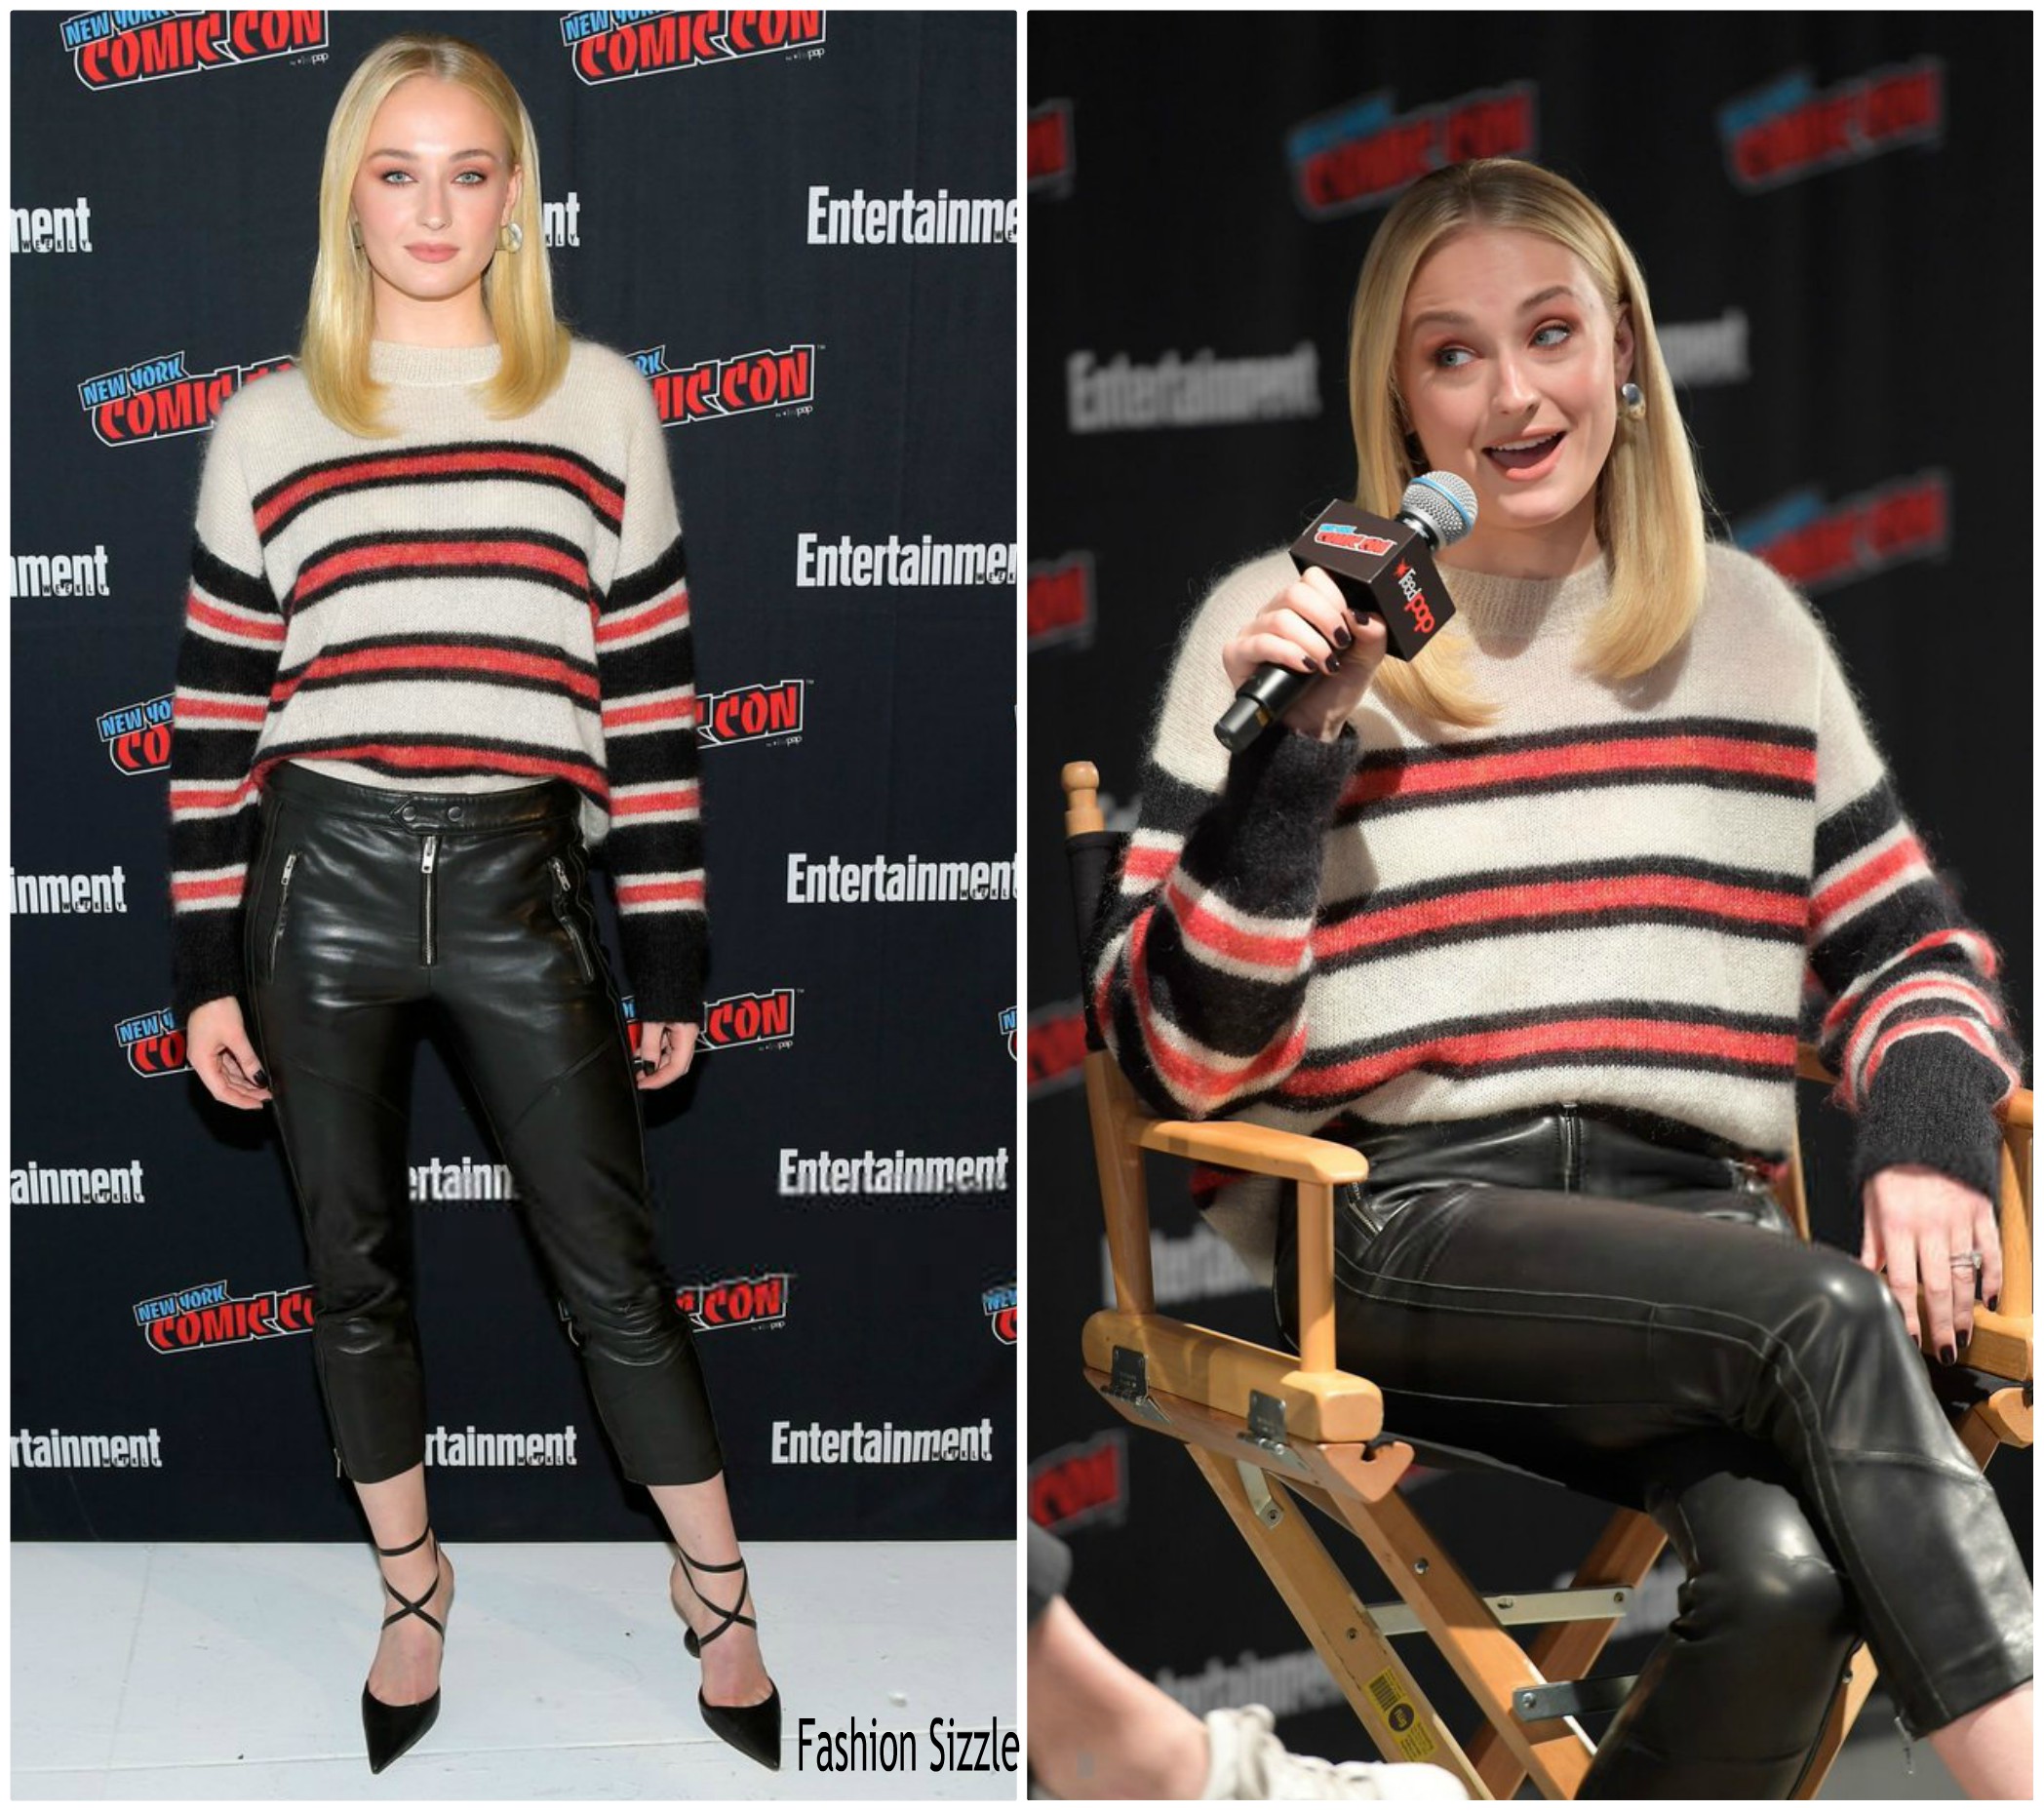 sophie-turner-in-isabel-marant-entertainment-weeklys-panel-comic-con-in-new-york